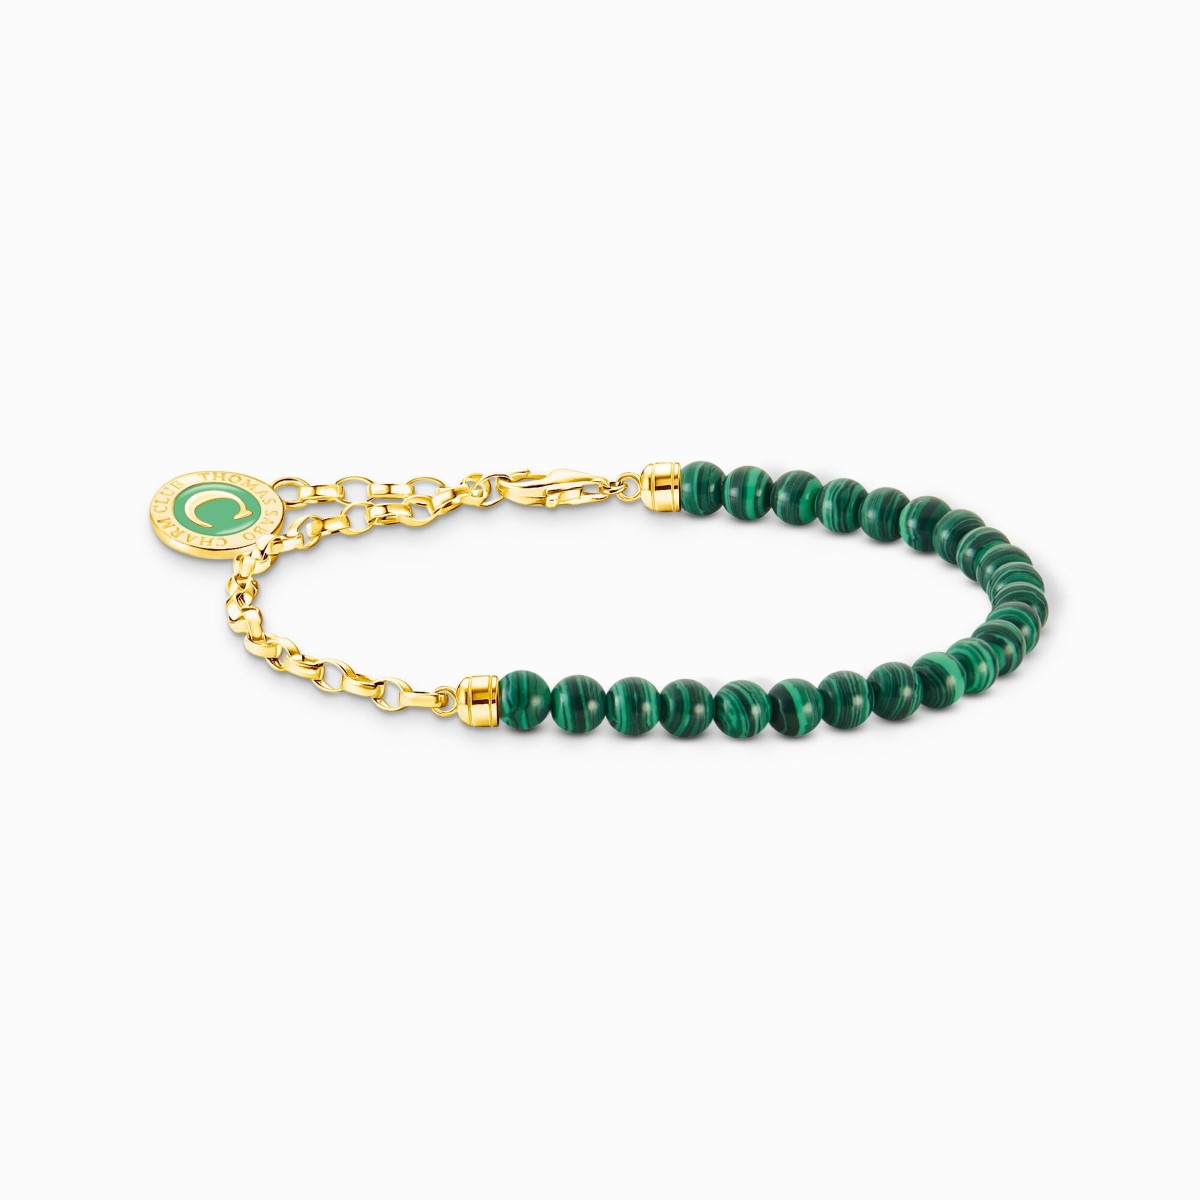 Thomas Sabo Member Charm Bracelet with Green Beads Gold Plated A2130-140-6